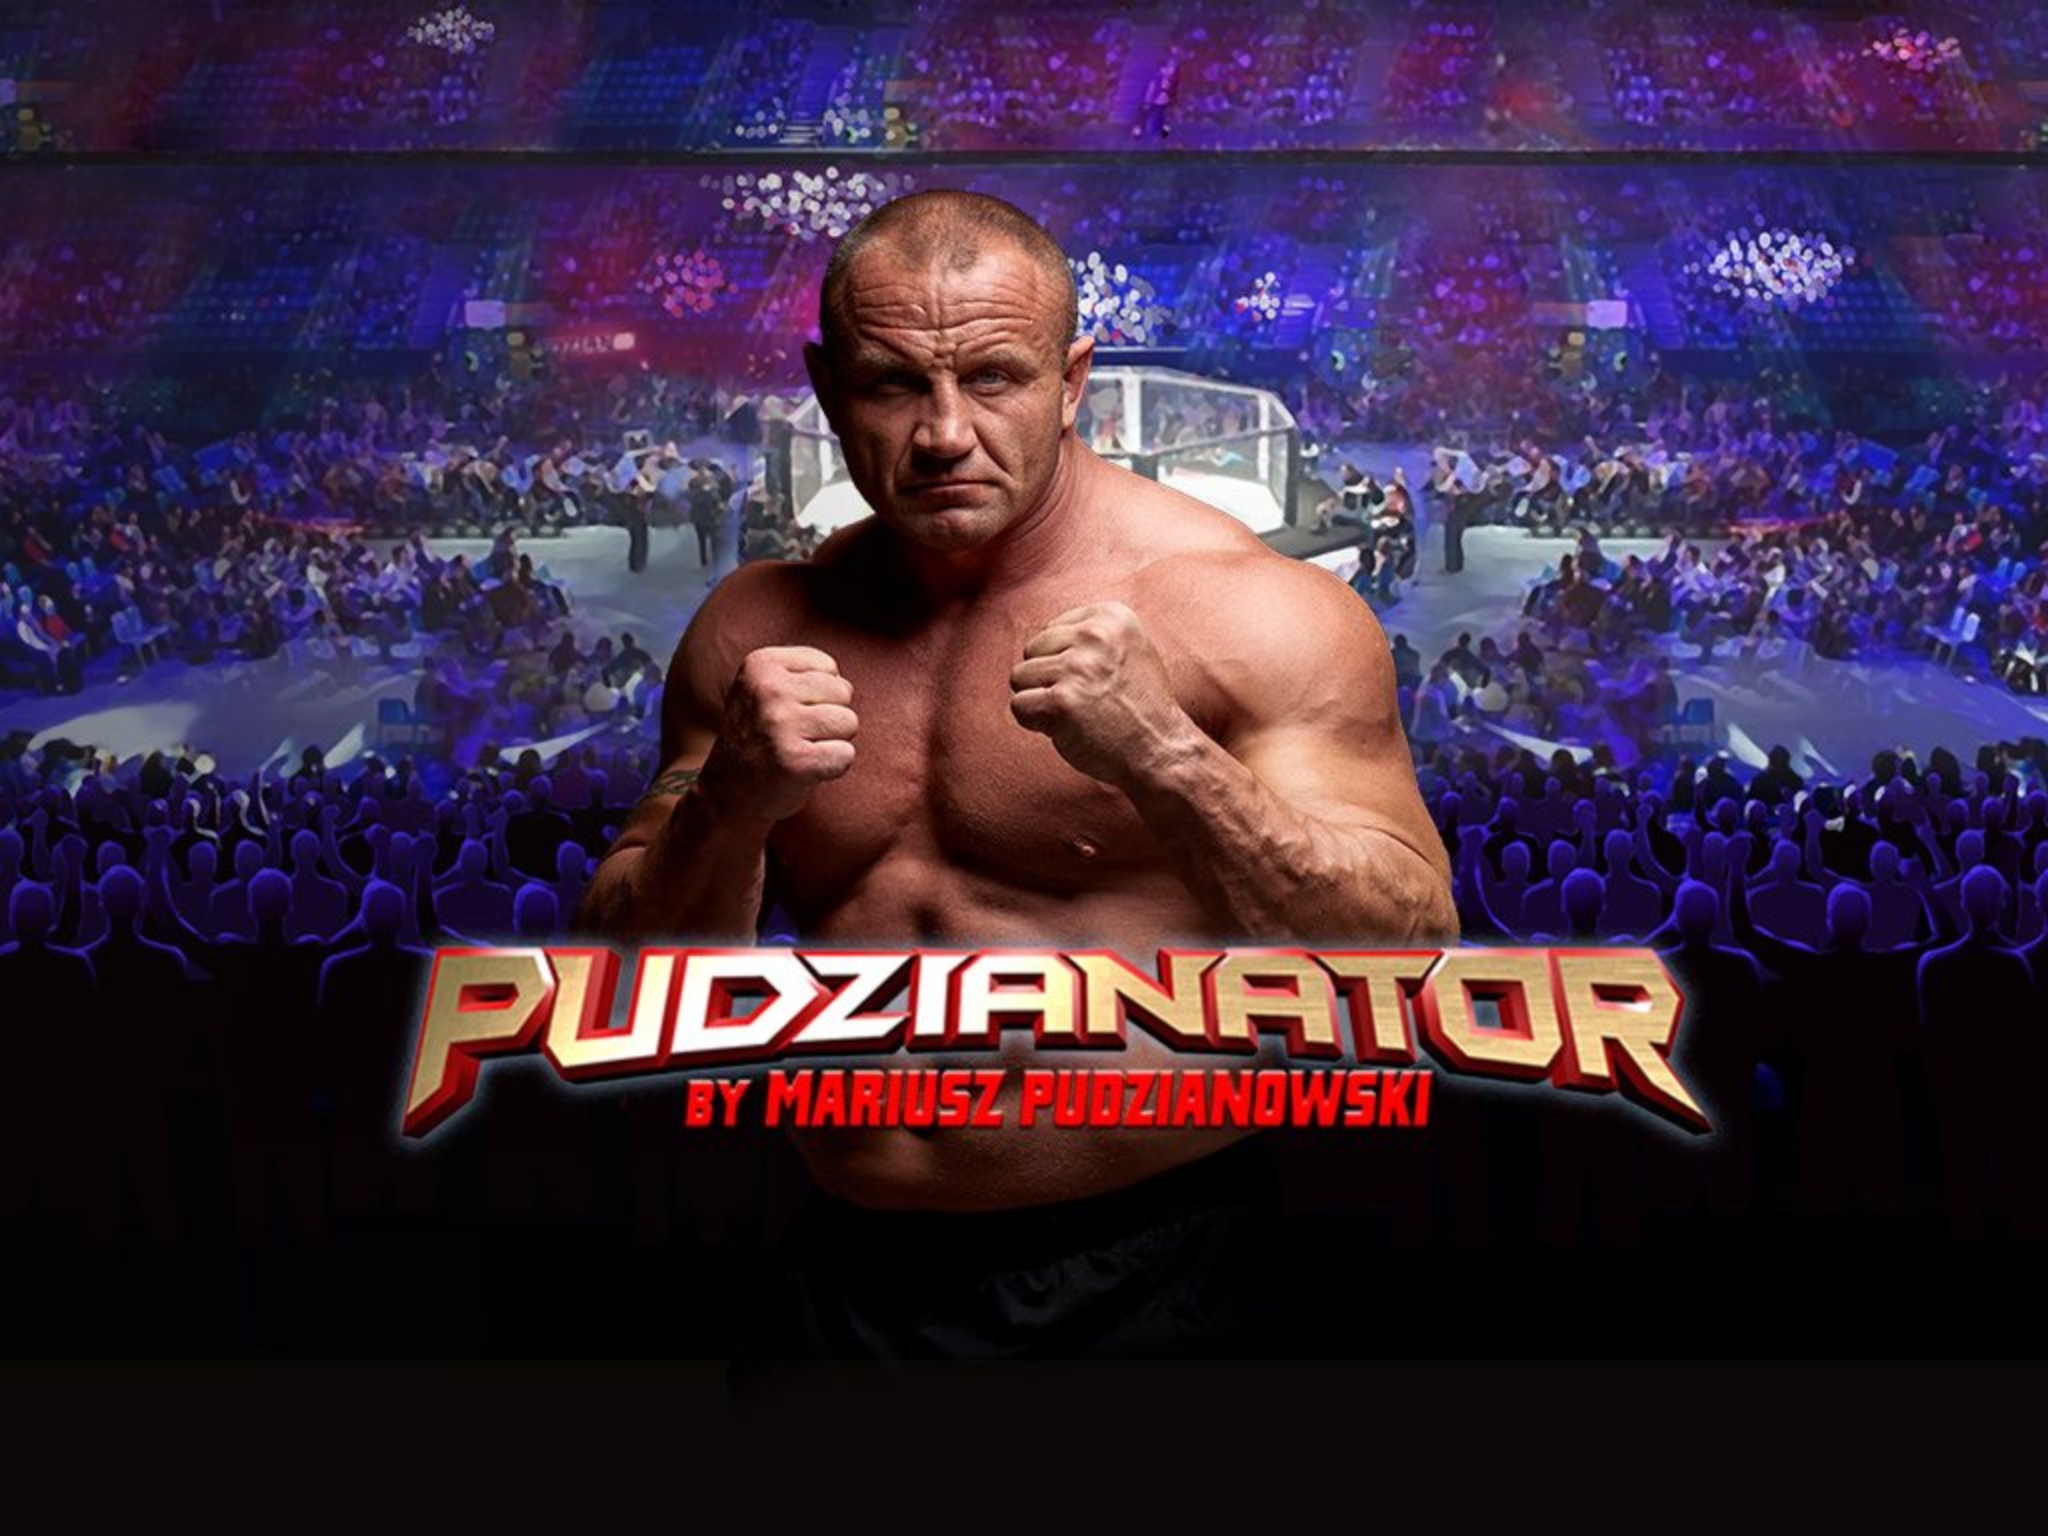 The Pudzianator Online Slot Demo Game by Promatic Games